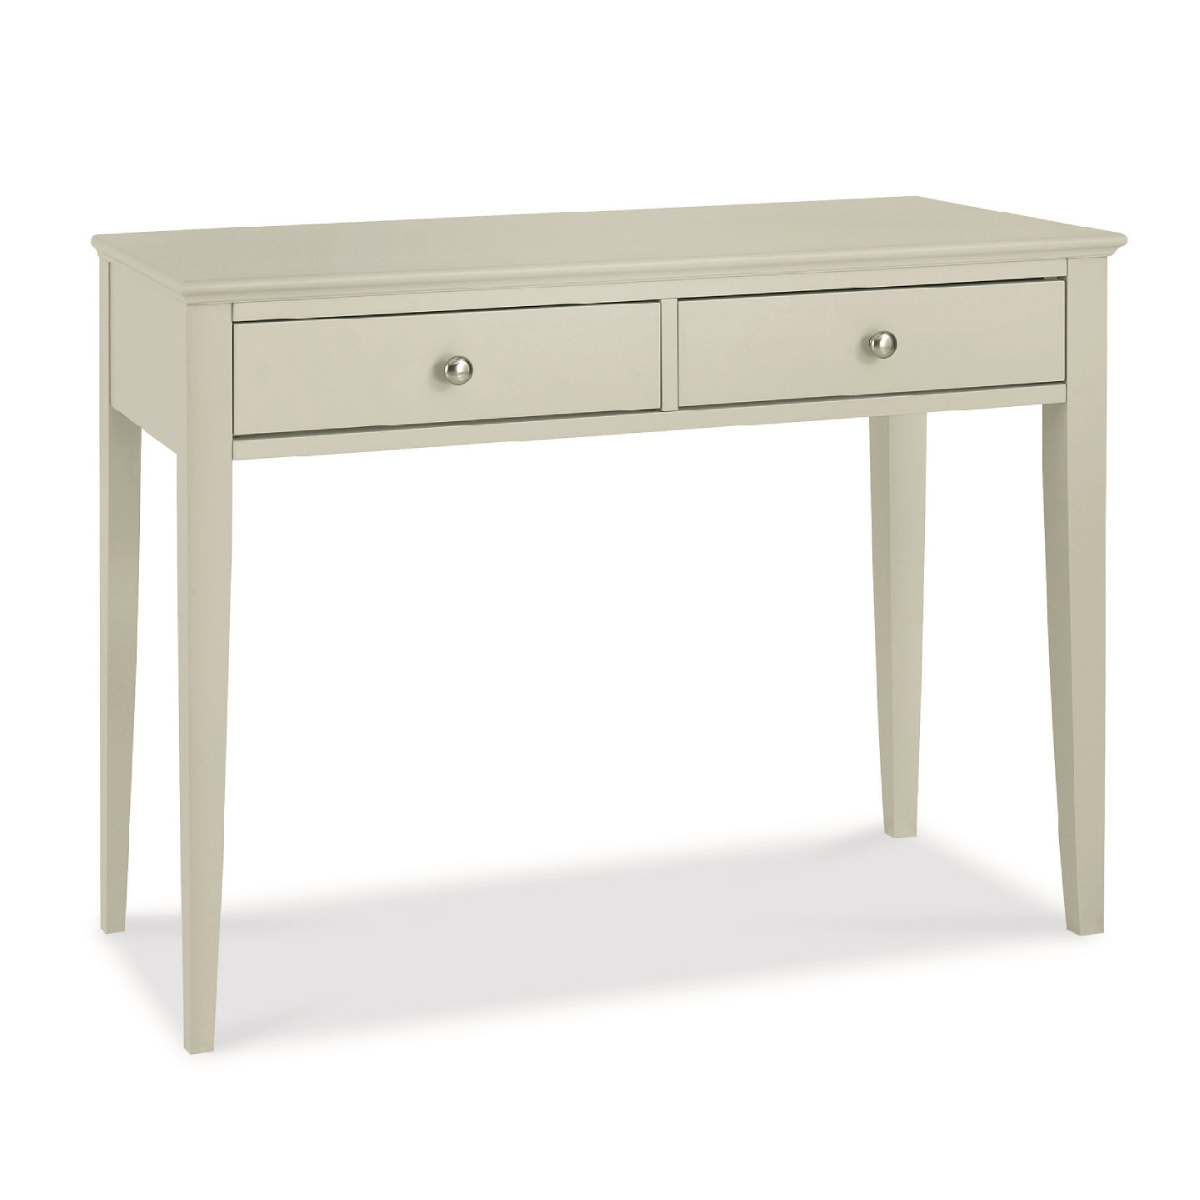 Ashby Soft Grey Dressing Table | grey dressing table | 2 drawer dressing table